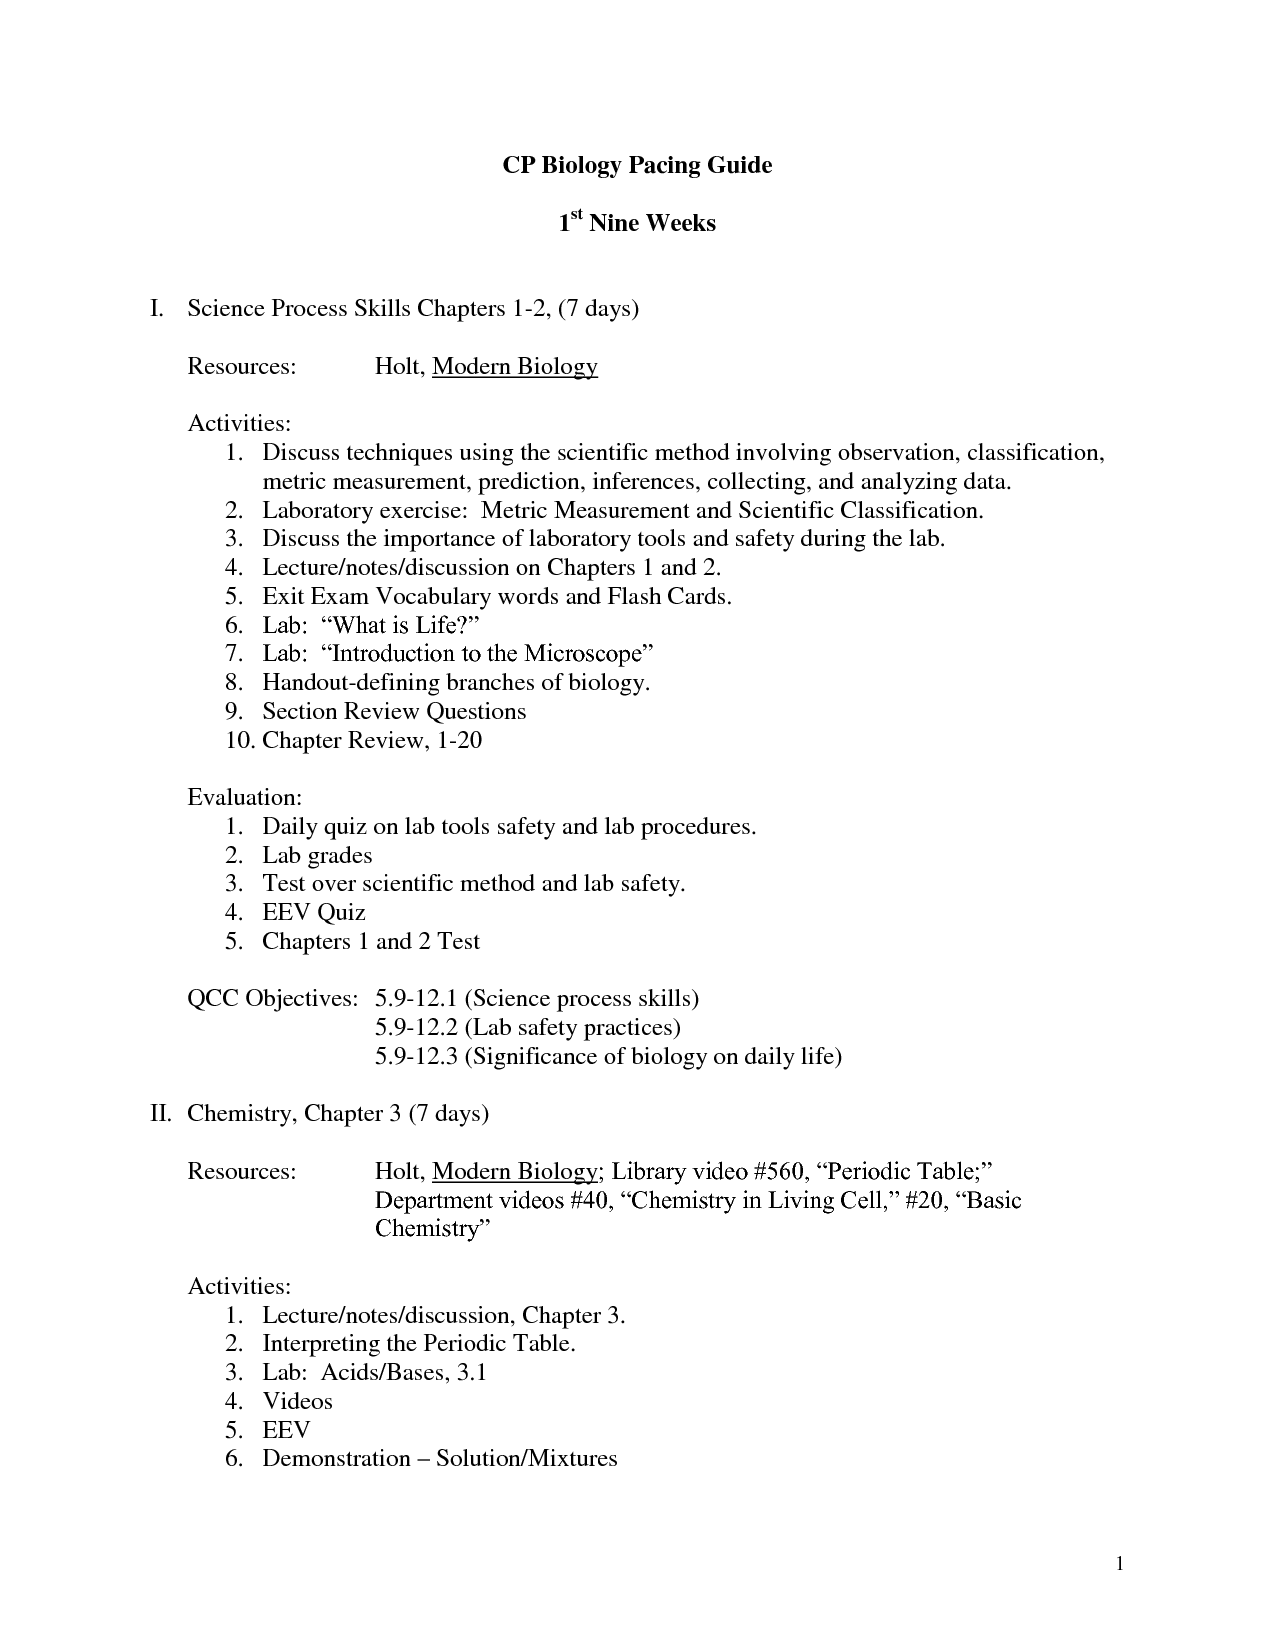 Prentice Hall Biology Textbook Study Guide